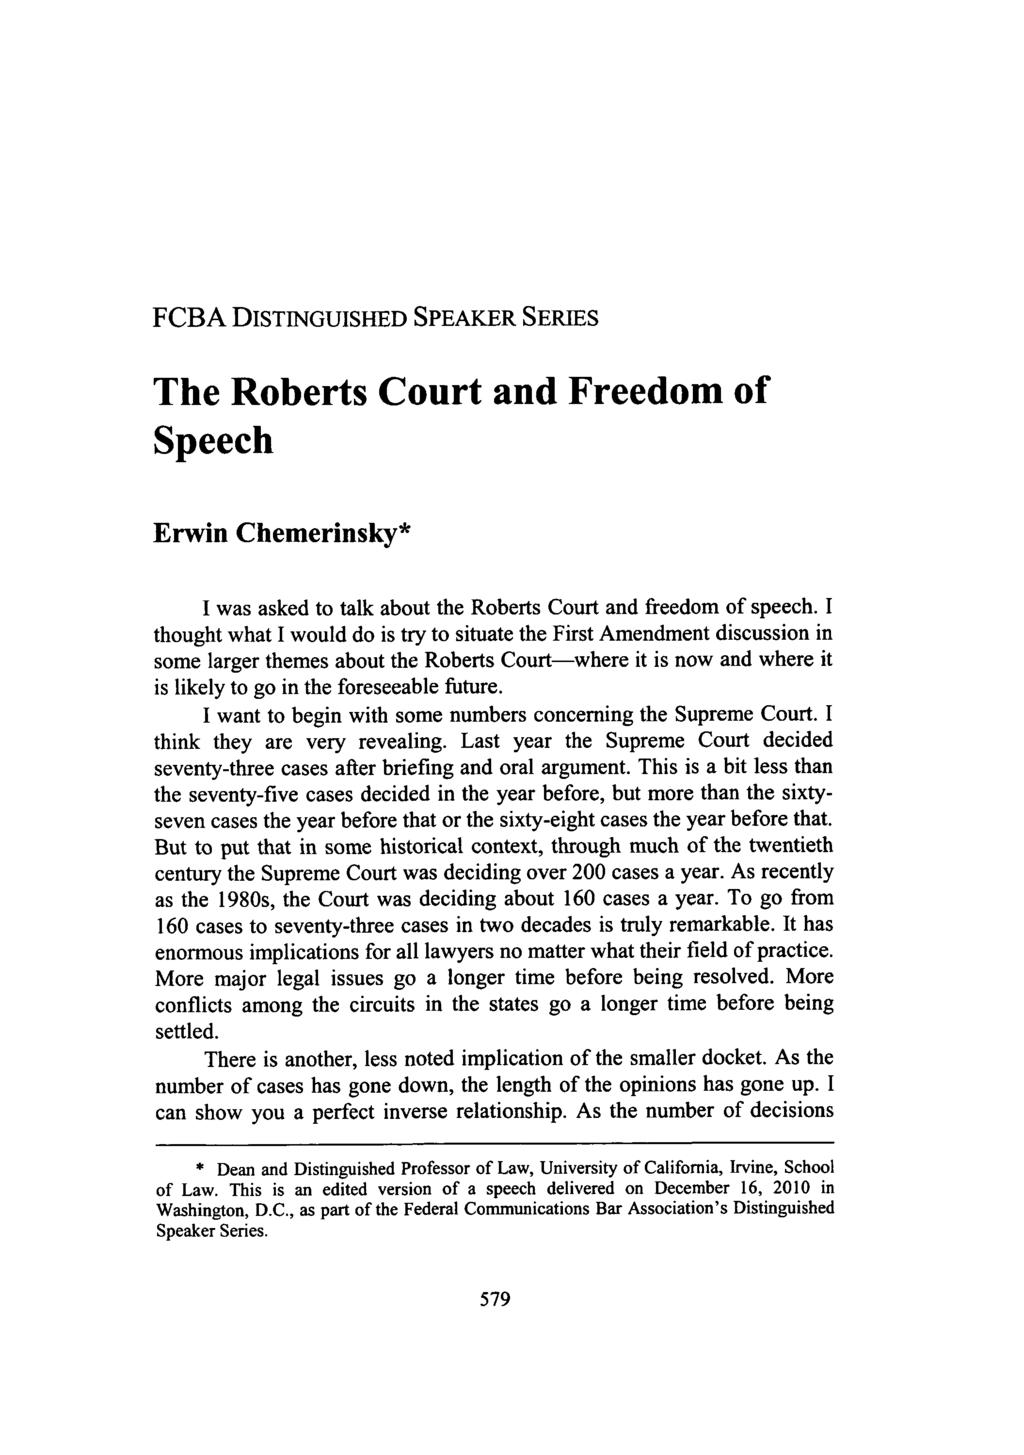 FCBA DISTINGUISHED SPEAKER SERIES The Roberts Court and Freedom of Speech Erwin Chemerinsky* I was asked to talk about the Roberts Court and freedom of speech.